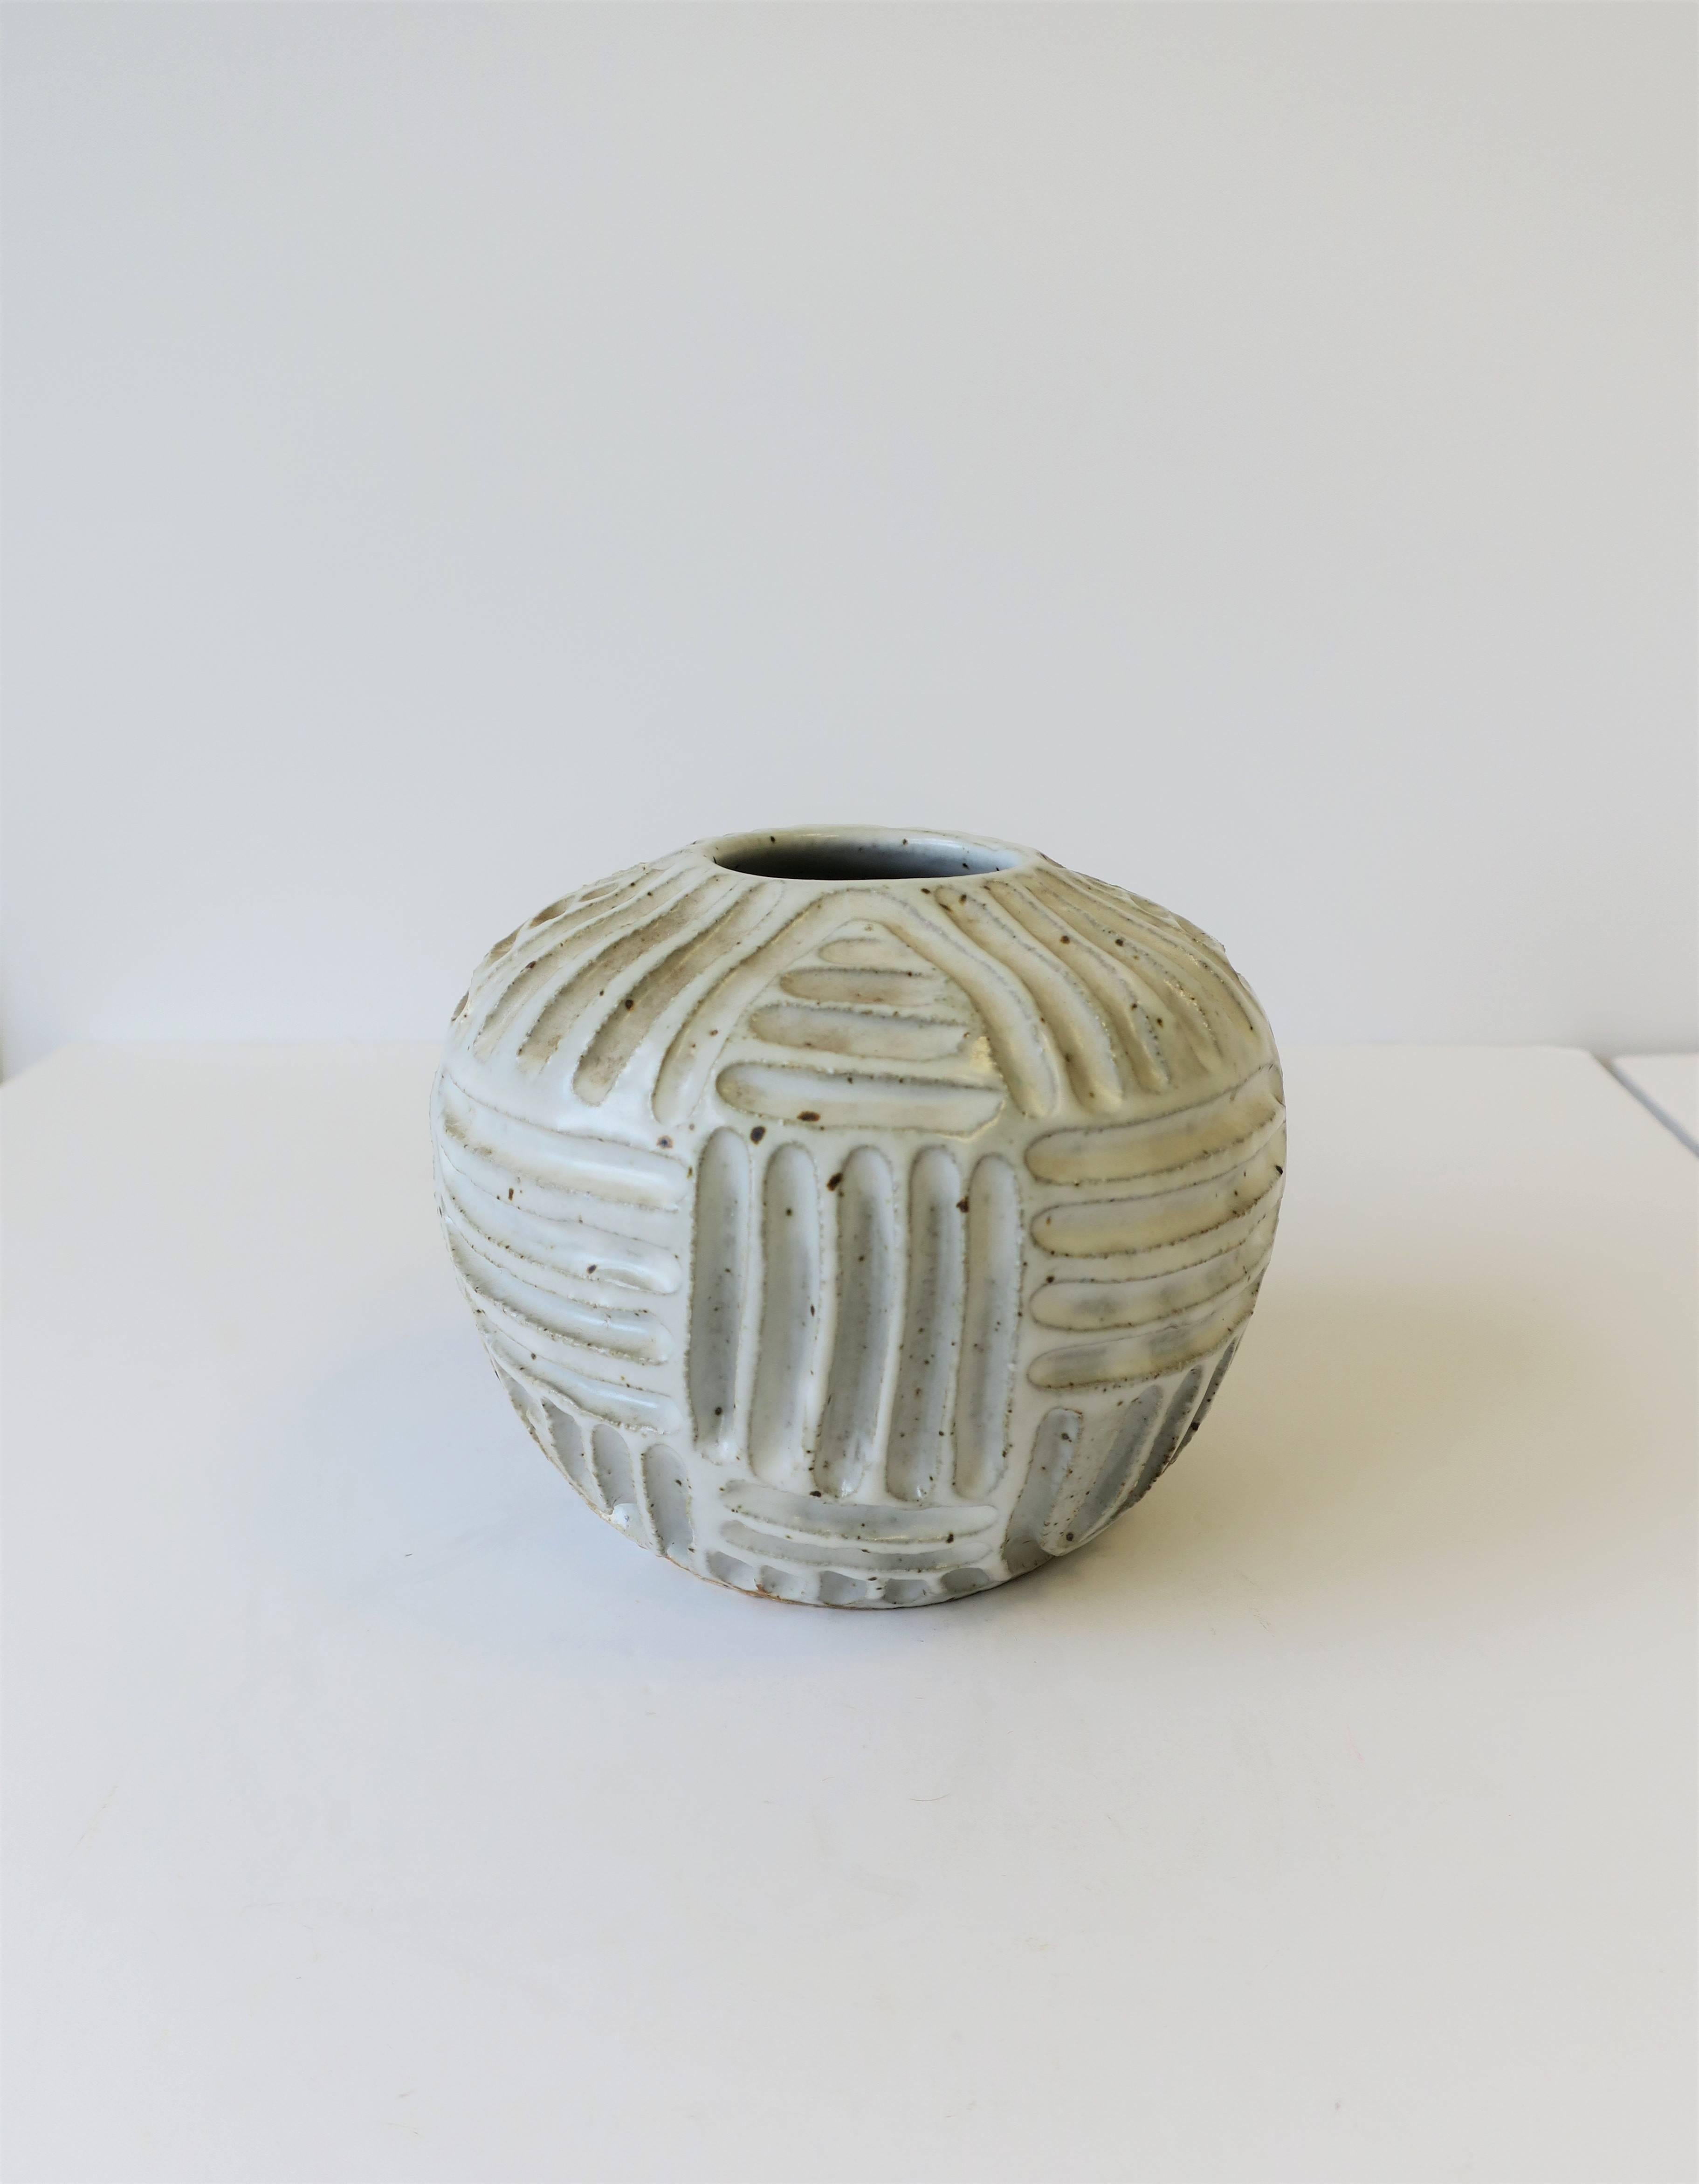 Vintage white pottery vase or vessel with exterior abstract or geometric surface design. 

Measures: 5.75 in. Diameter x 5 in. H

Item available here online. By request, item can be made available by appointment to the trade in New York.
 